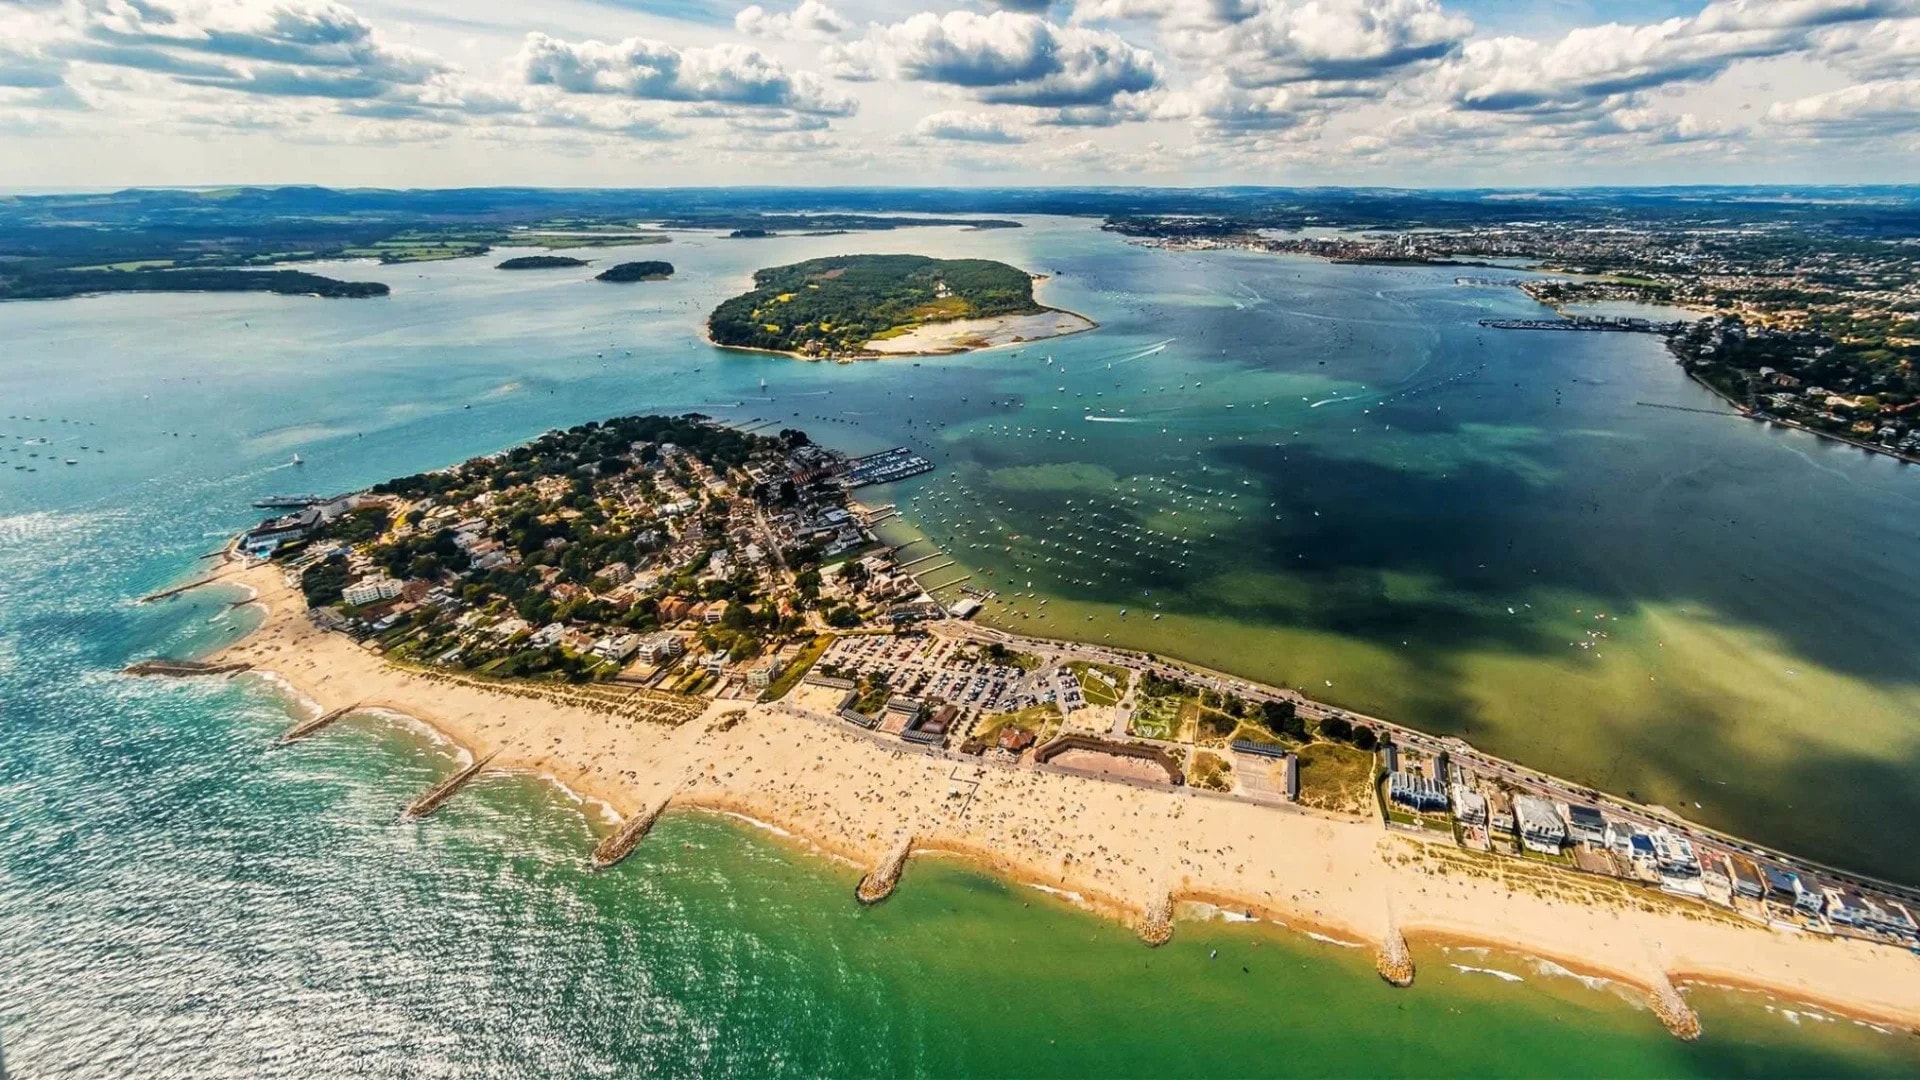 Aerial photo of Sandbanks, Dorset with sandy beaches and islands in Poole Harbour.